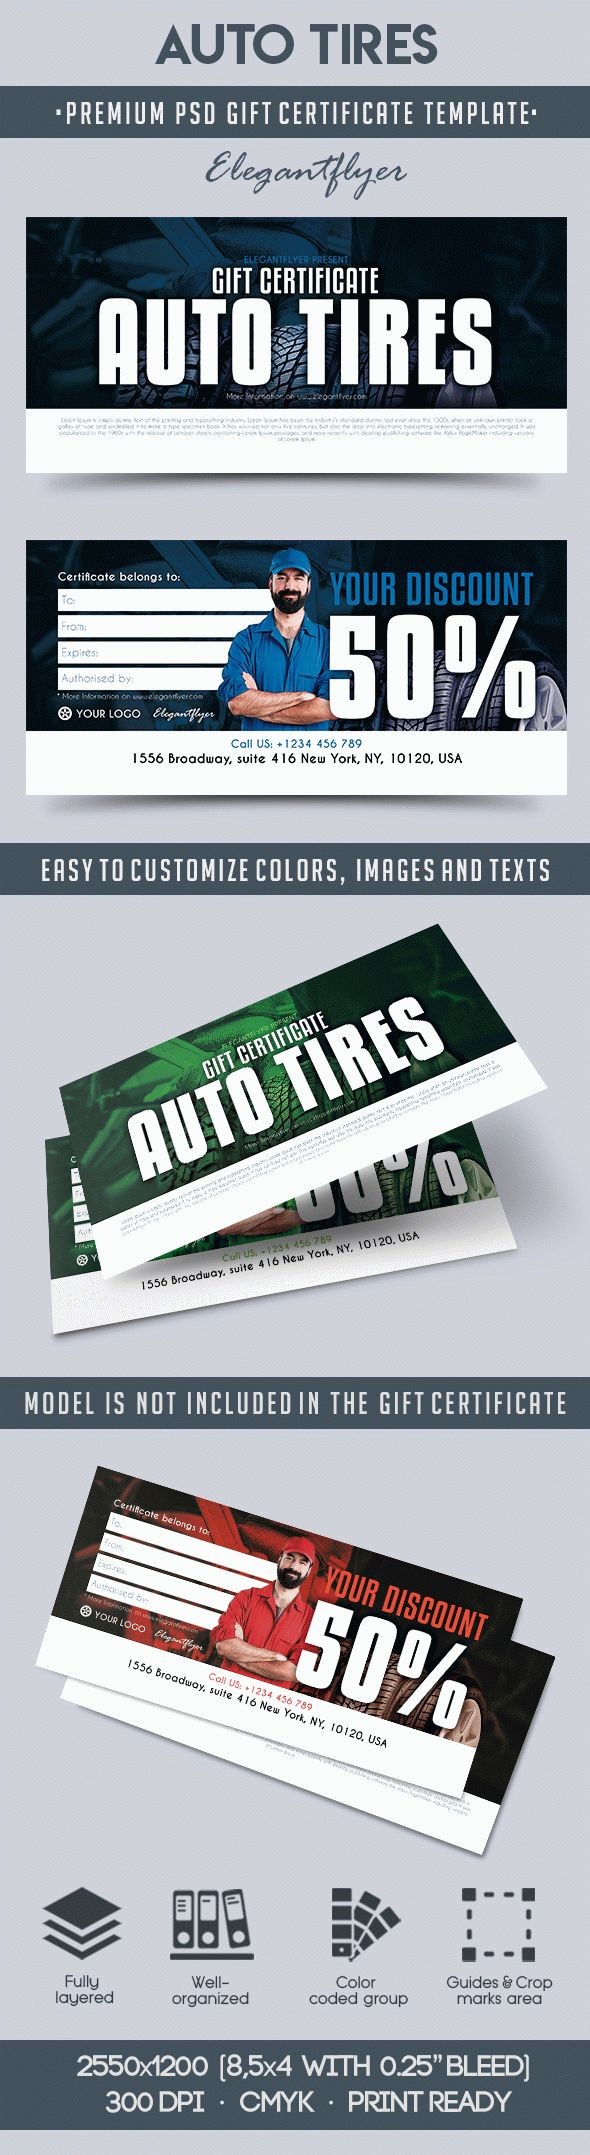 Auto Tires Premium Gift Certificate PSD Template 10020102 by